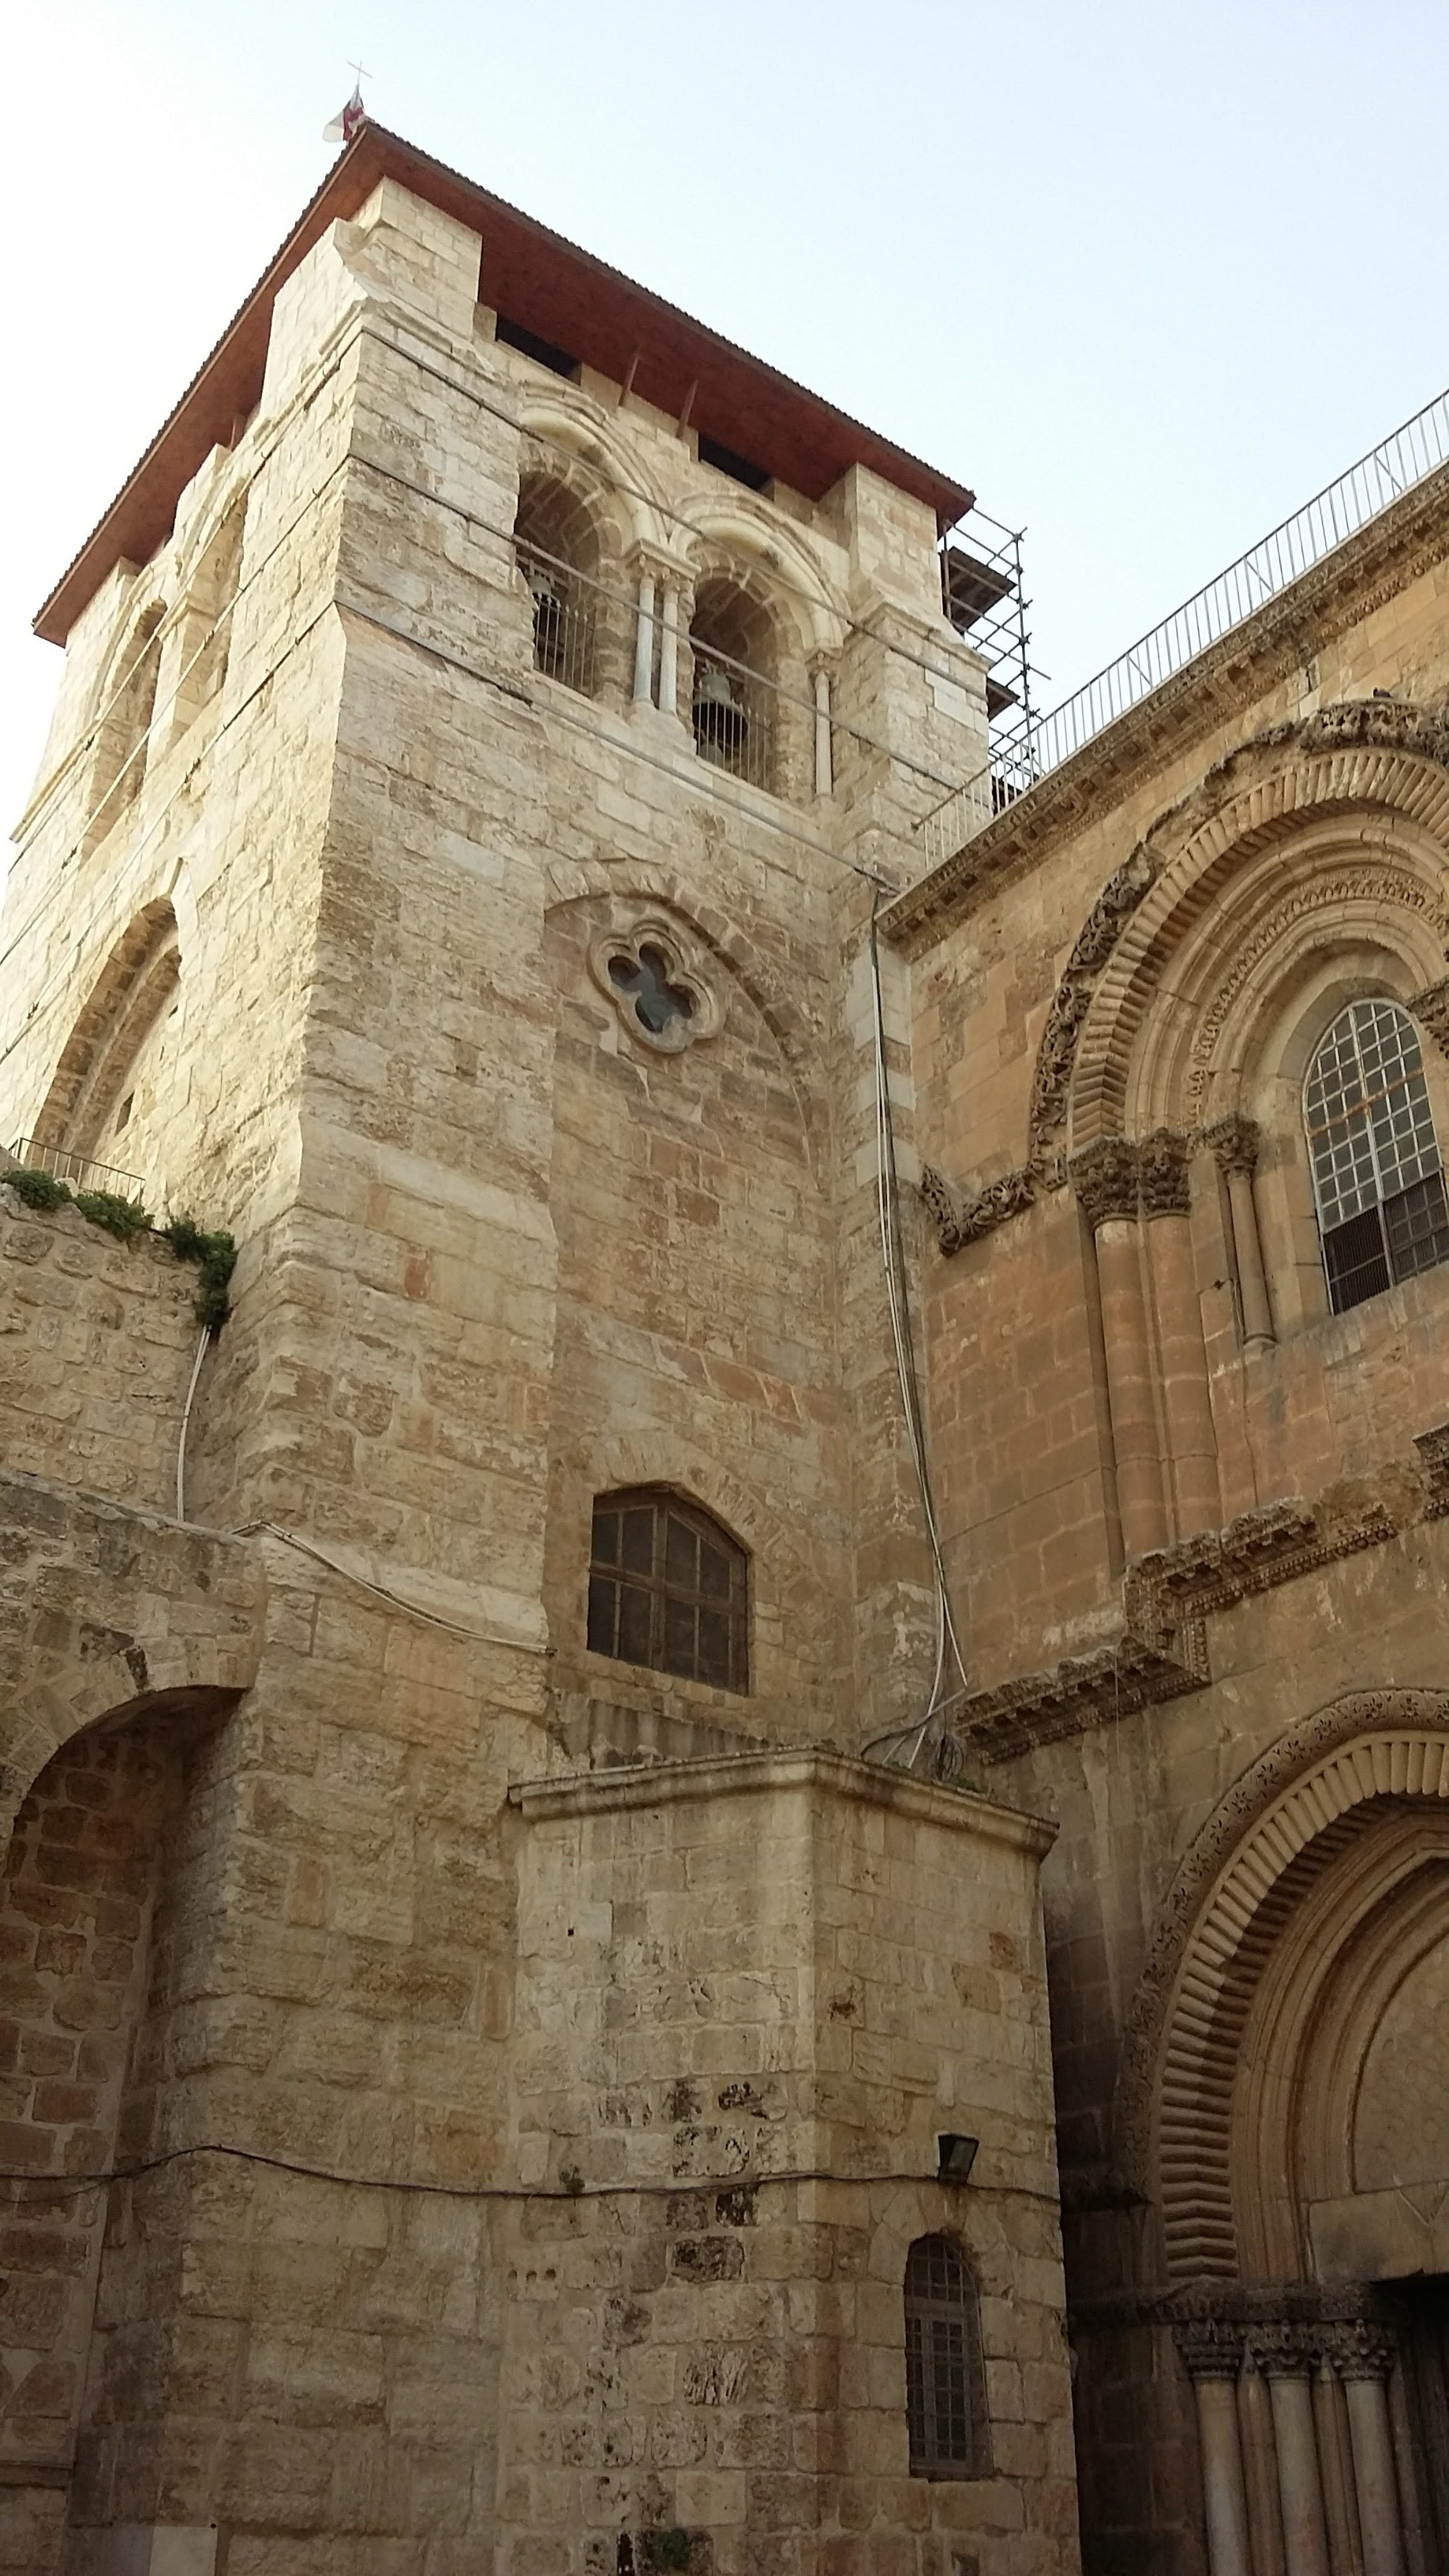 Church of the Holy Sepulchre, Old Citu of Jerusalem. Site of the crucifixion.